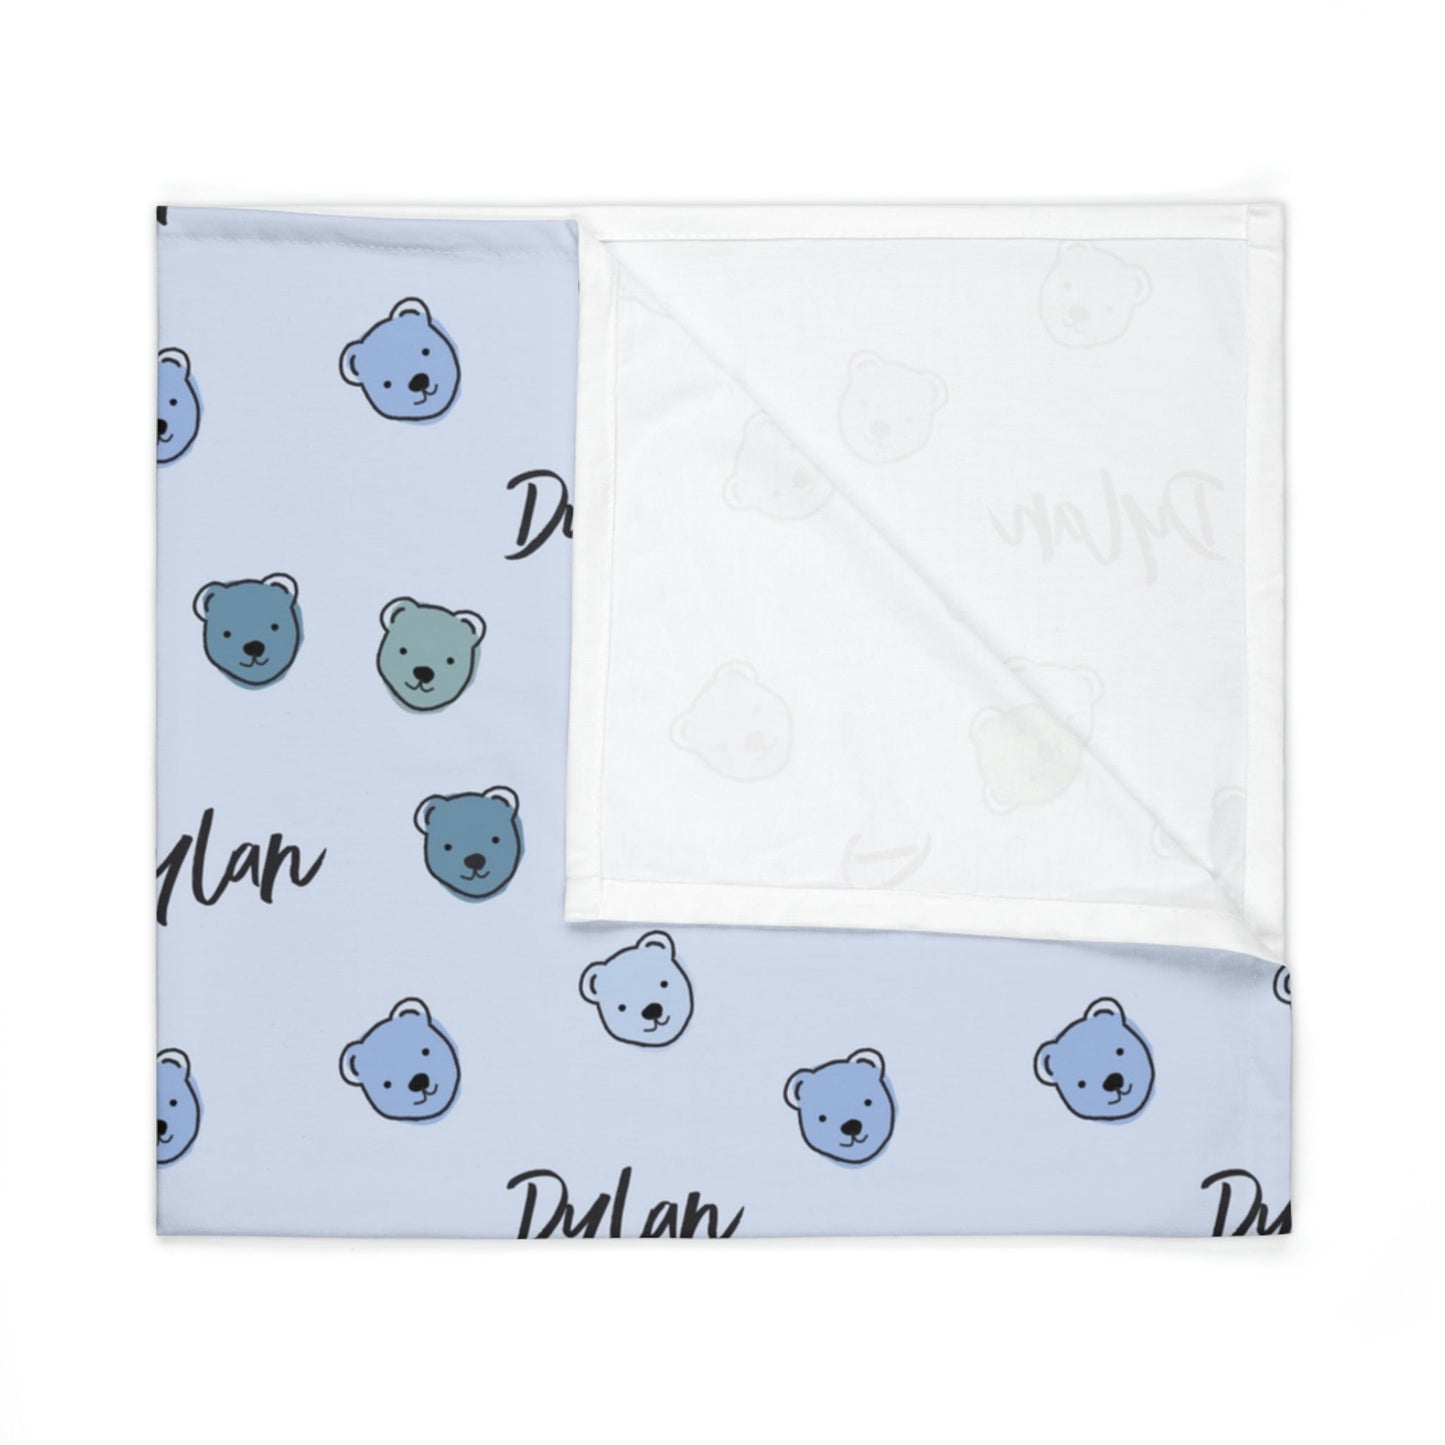 Folded jersey fabric personalized baby blanket in blue cuddly bear pattern